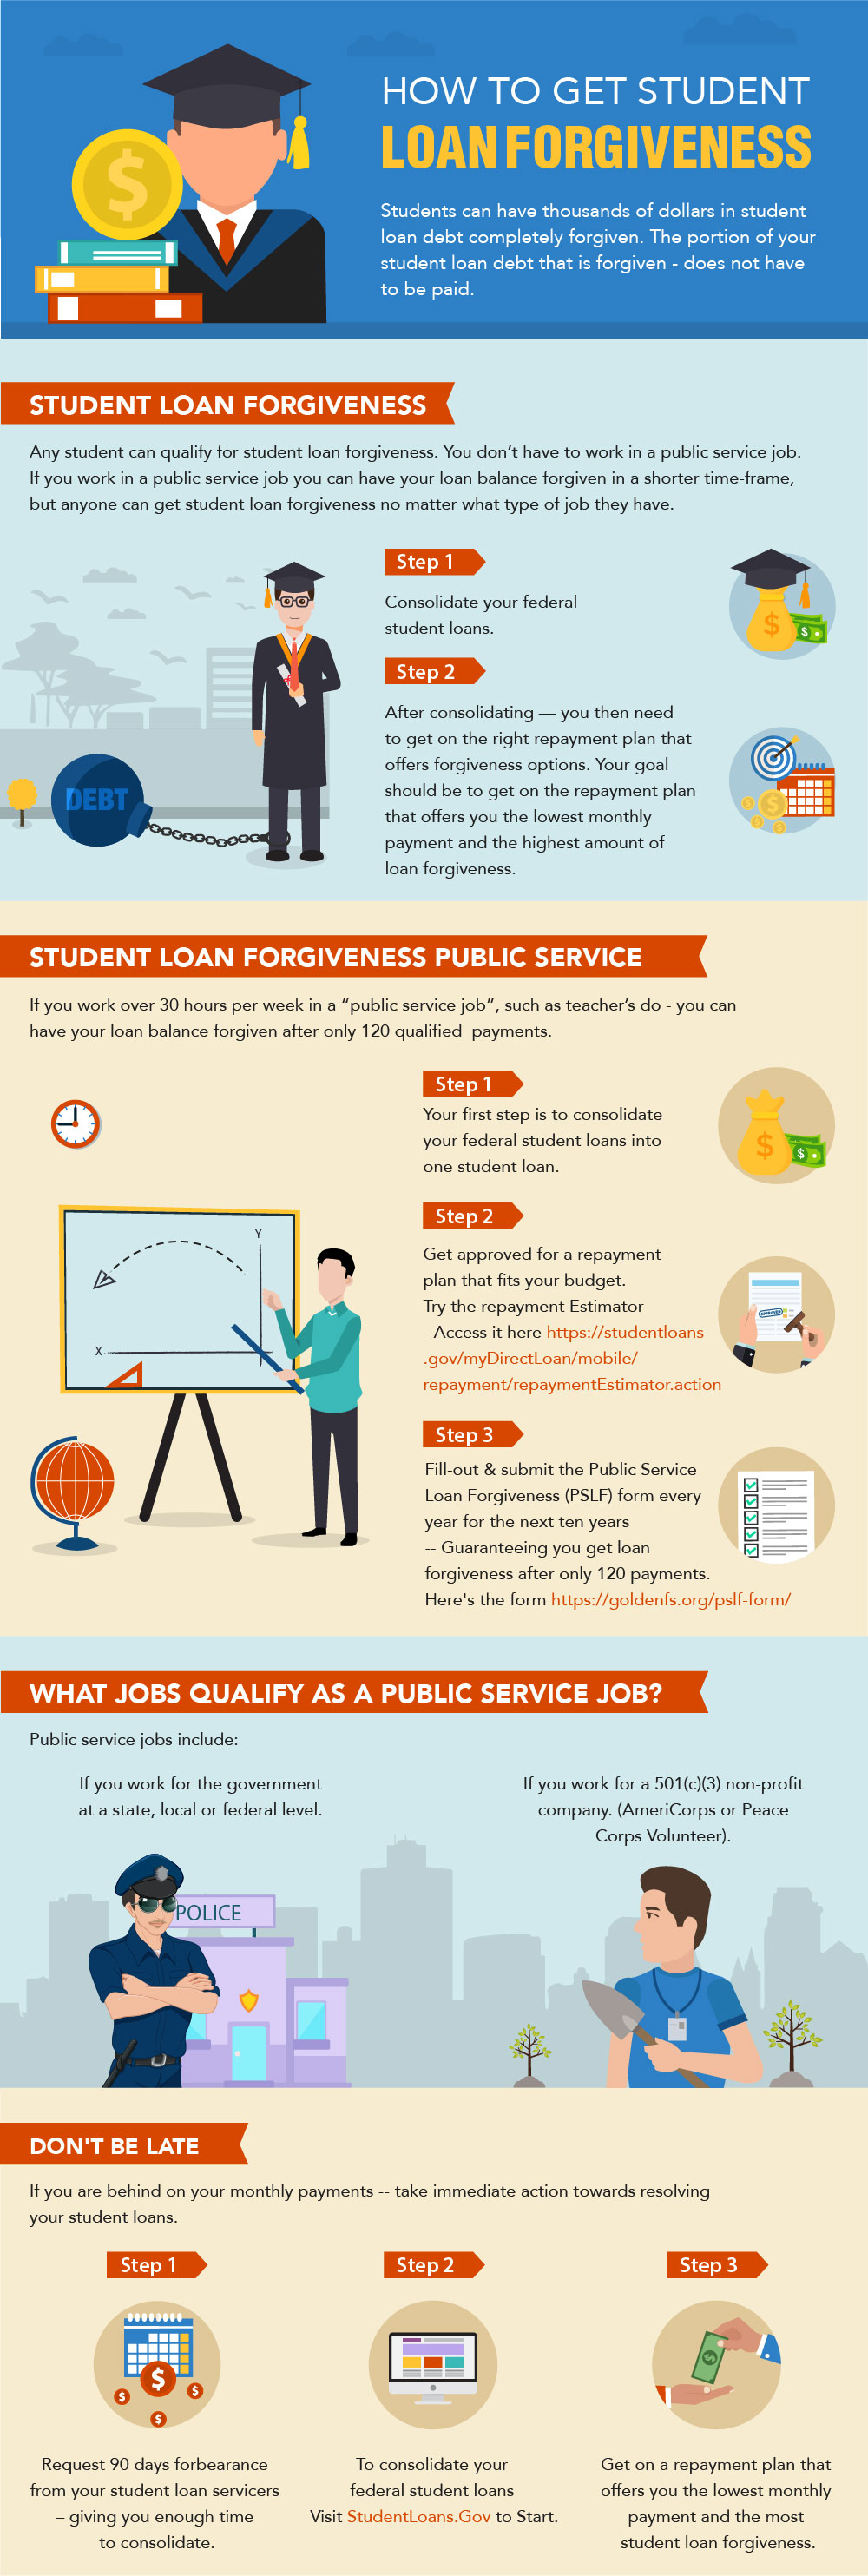 How To Get Student Loan Forgiveness Infographic 